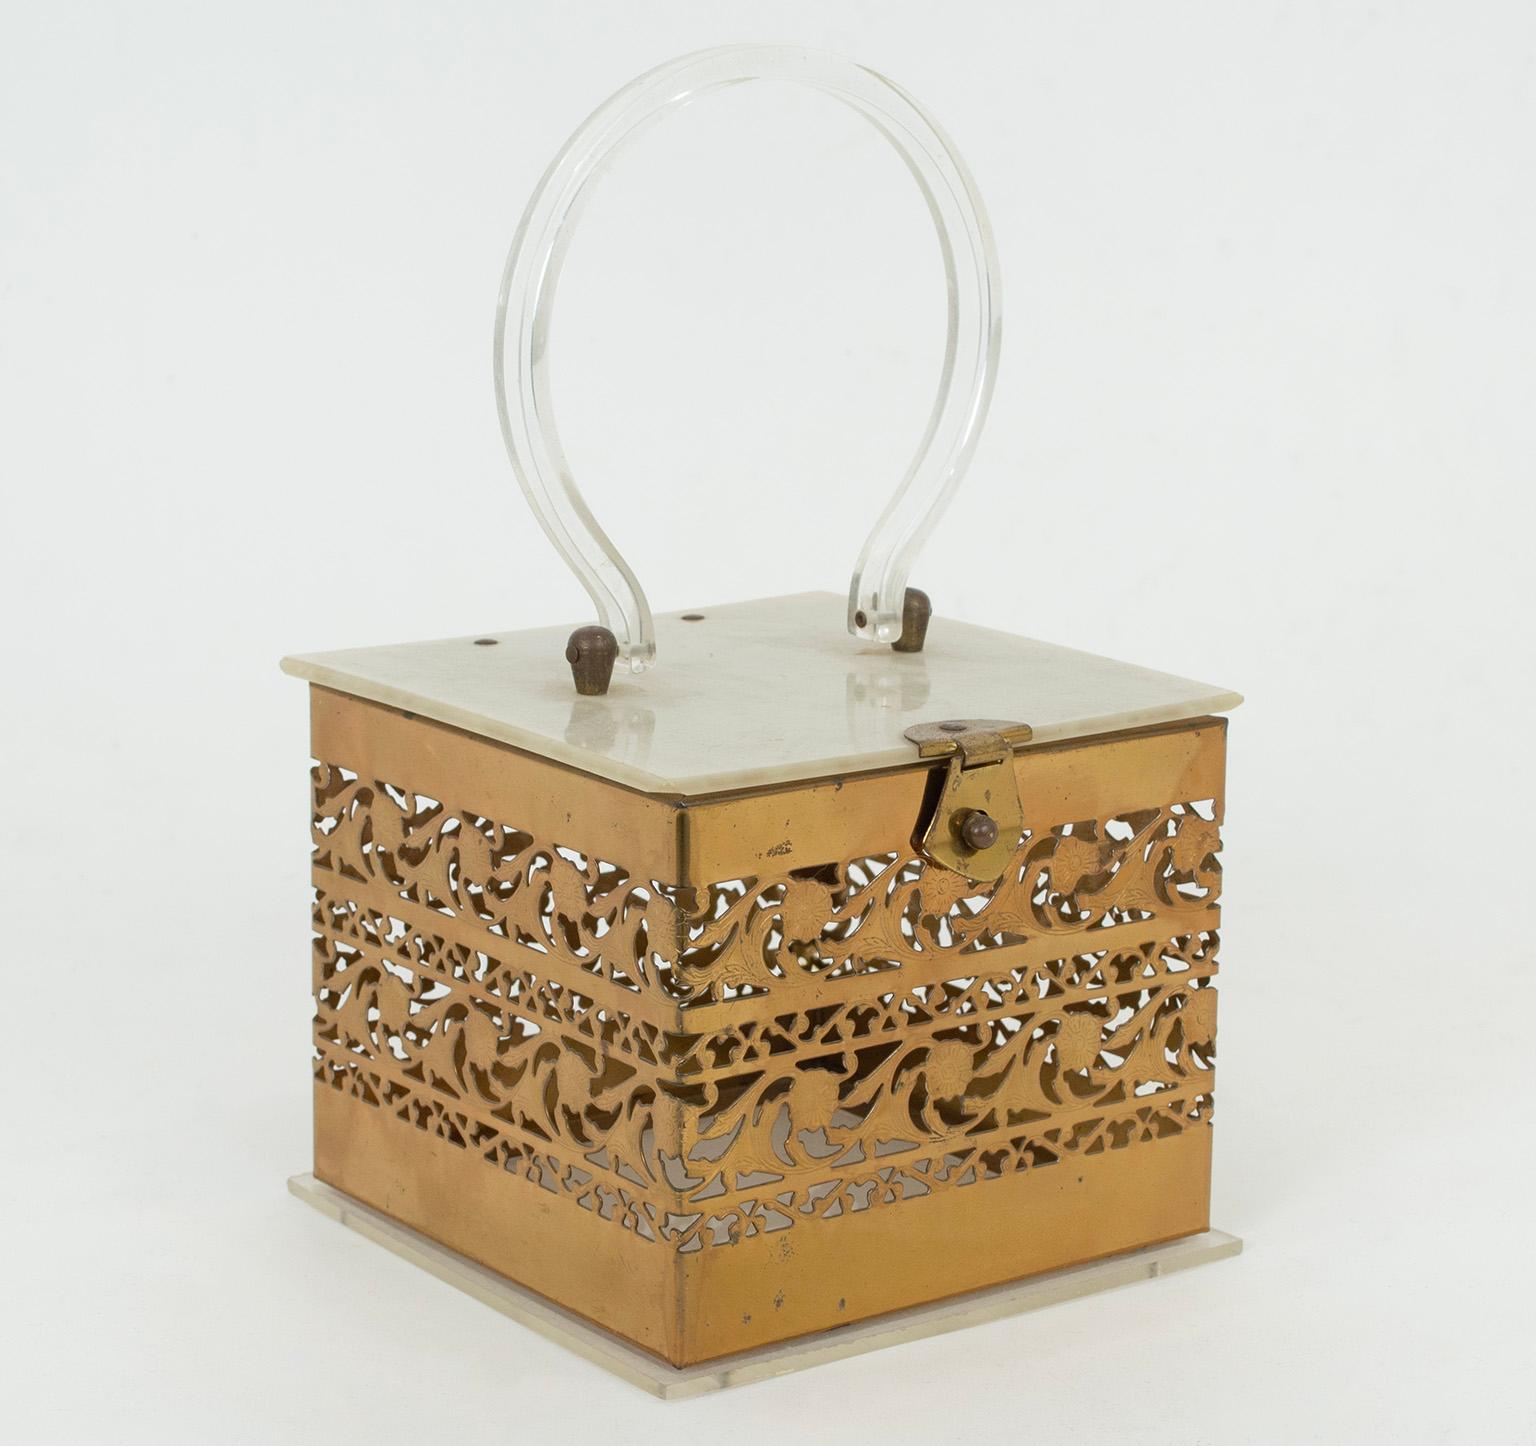 Simultaneously delicate and sturdy, this unusual box purse provides a glimpse of its contents via openwork filigree sides, while a clear Lucite platform base shows their entirety from beneath. A marbled Mother of Pearl hinged lid keeps items safe